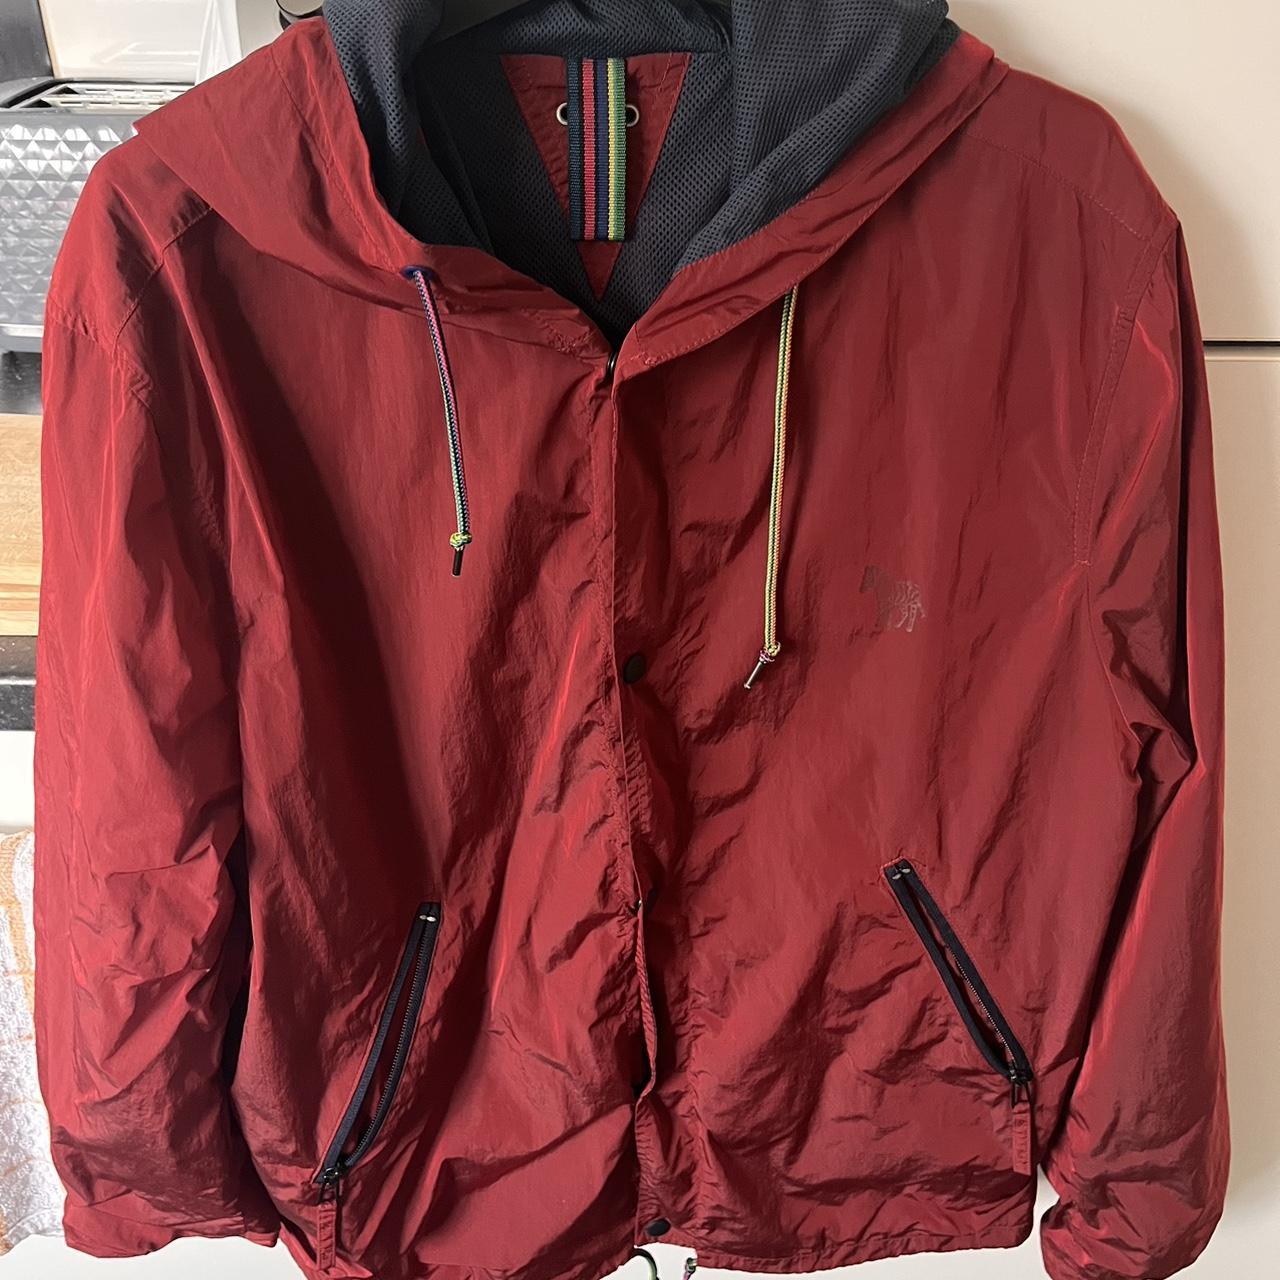 Paul Smith lightweight jacket with reflective... - Depop